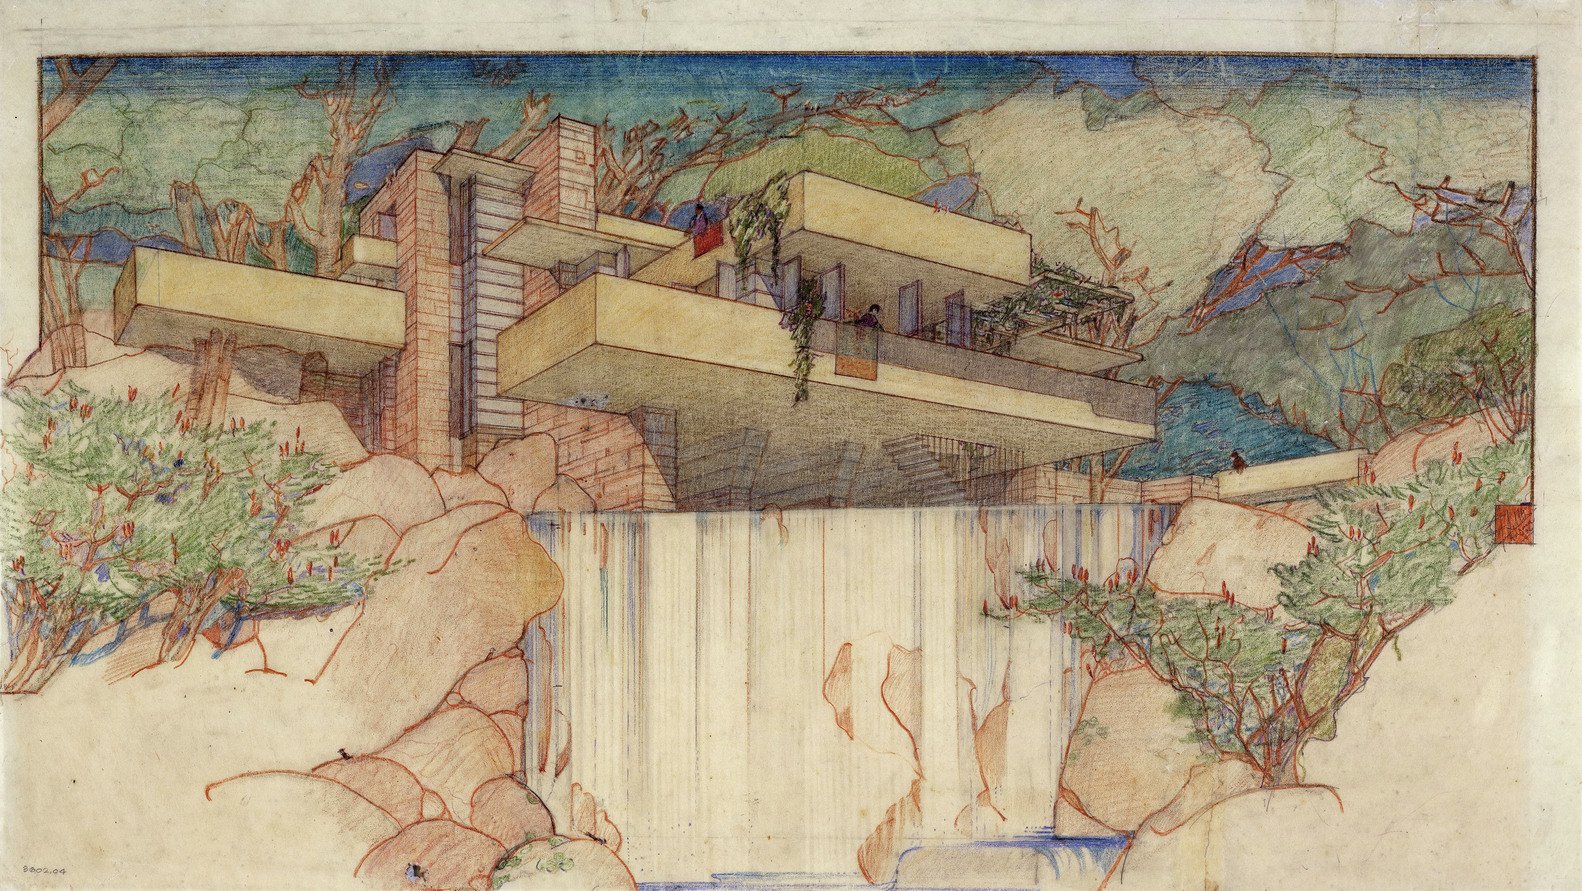 &copy; The Frank Lloyd Wright Foundation Archives (The Museum of Modern Art | Avery Architectural &amp; Fine Arts Library, Columbia University, New York)